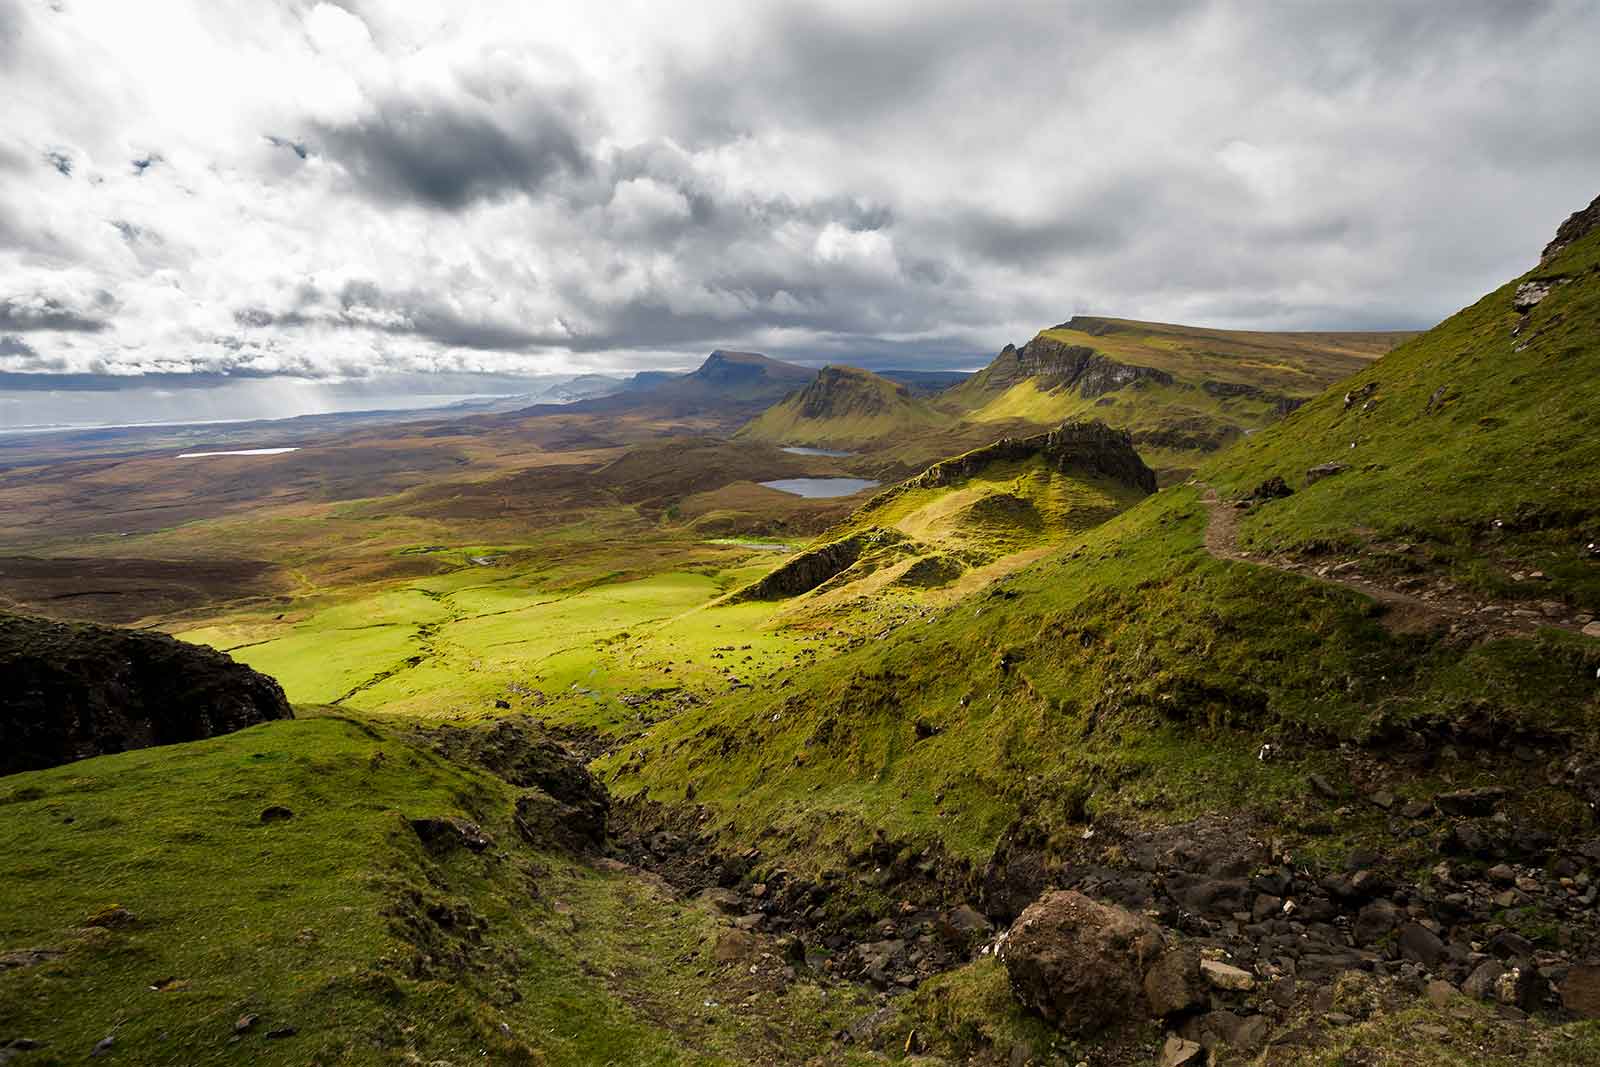 One of the most beautiful hikes in the world, with the most stunning landscape: The Quiraing in Scotland.